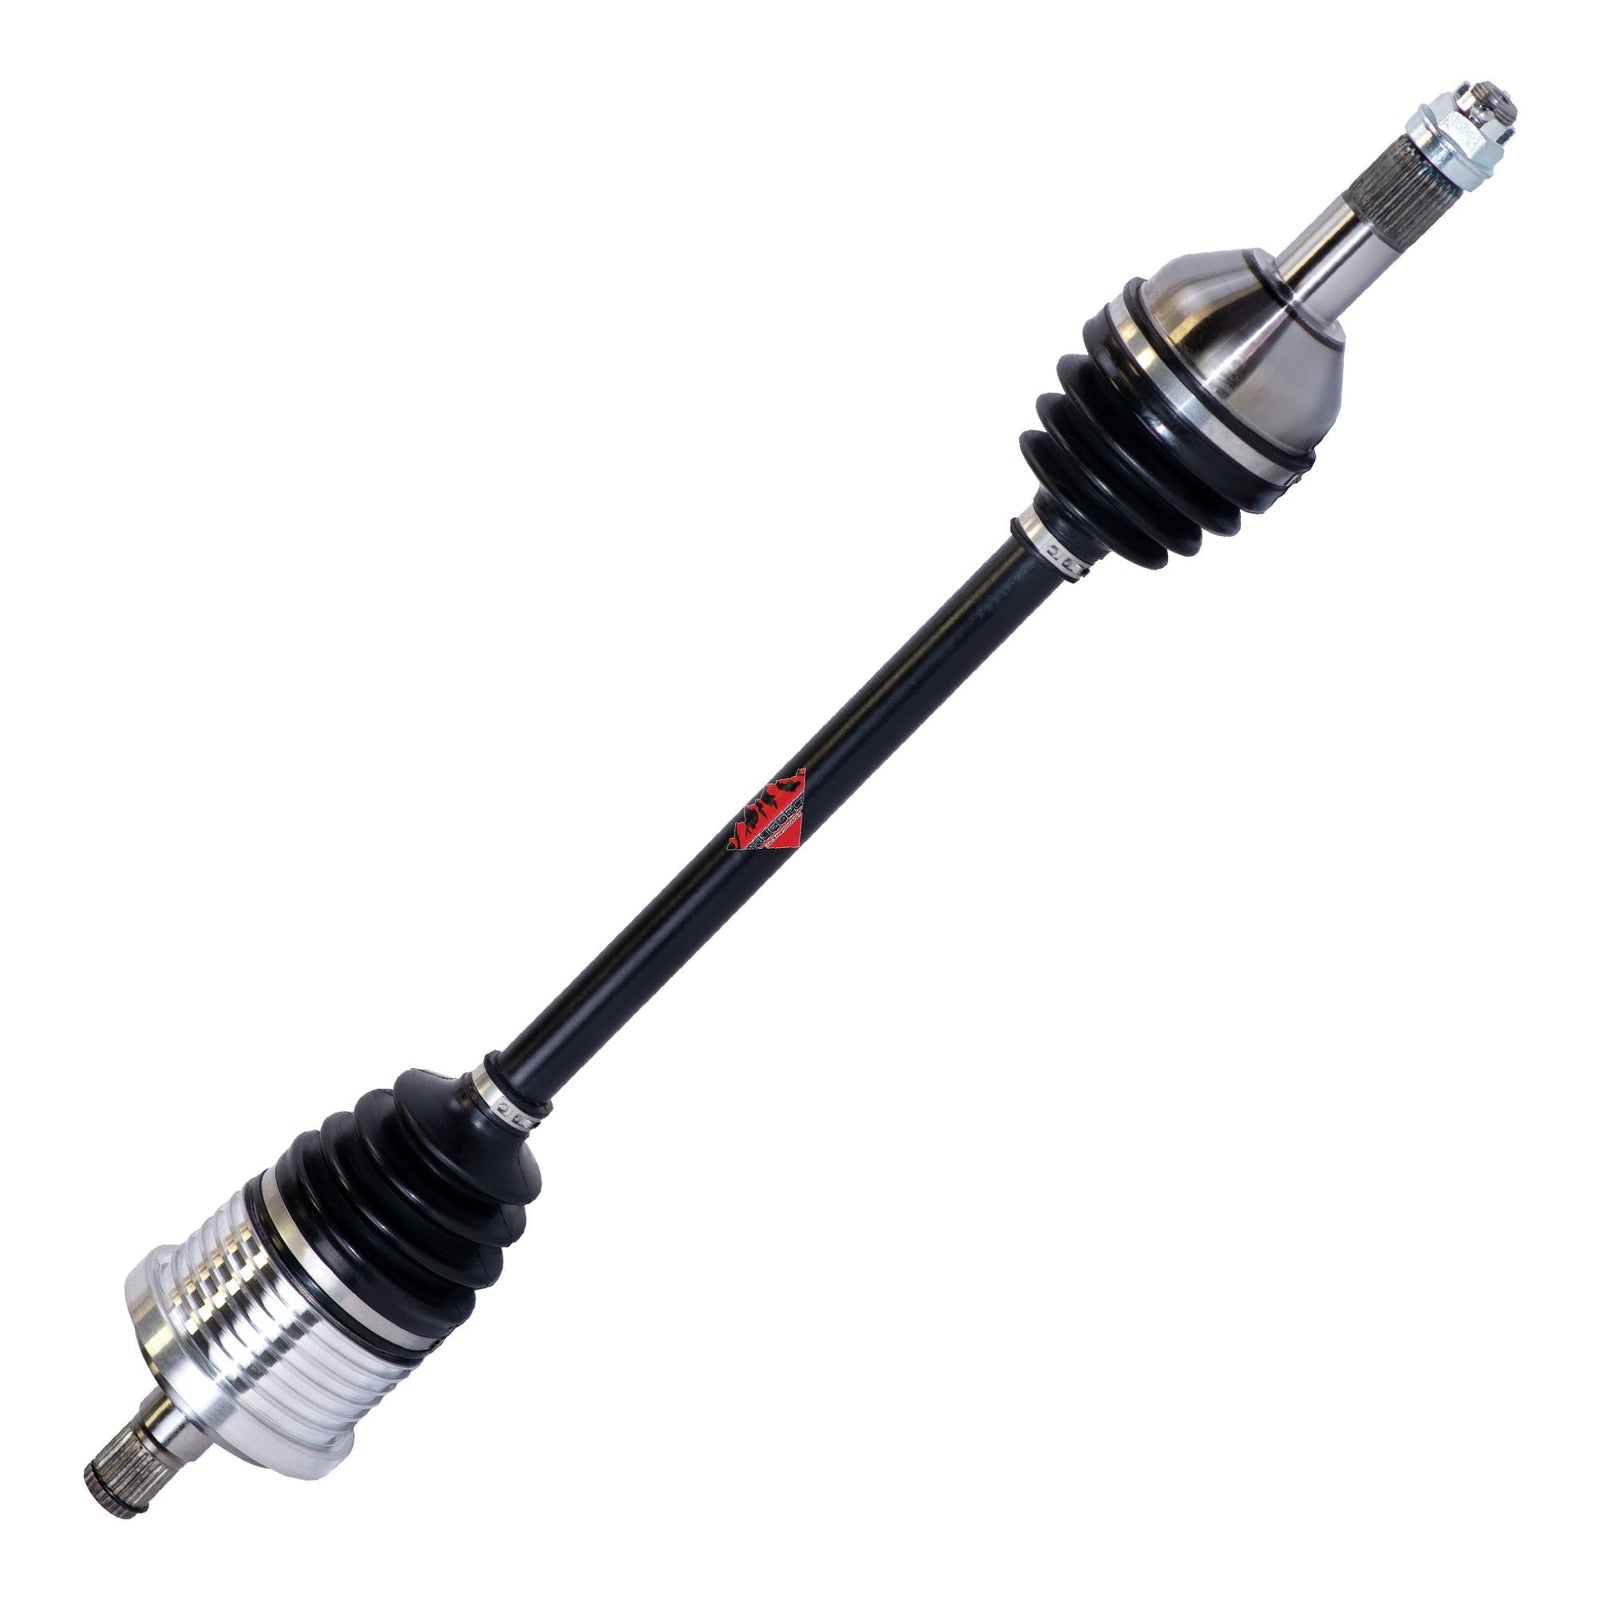 Arctic Cat Prowler 700 Rugged Performance Axle